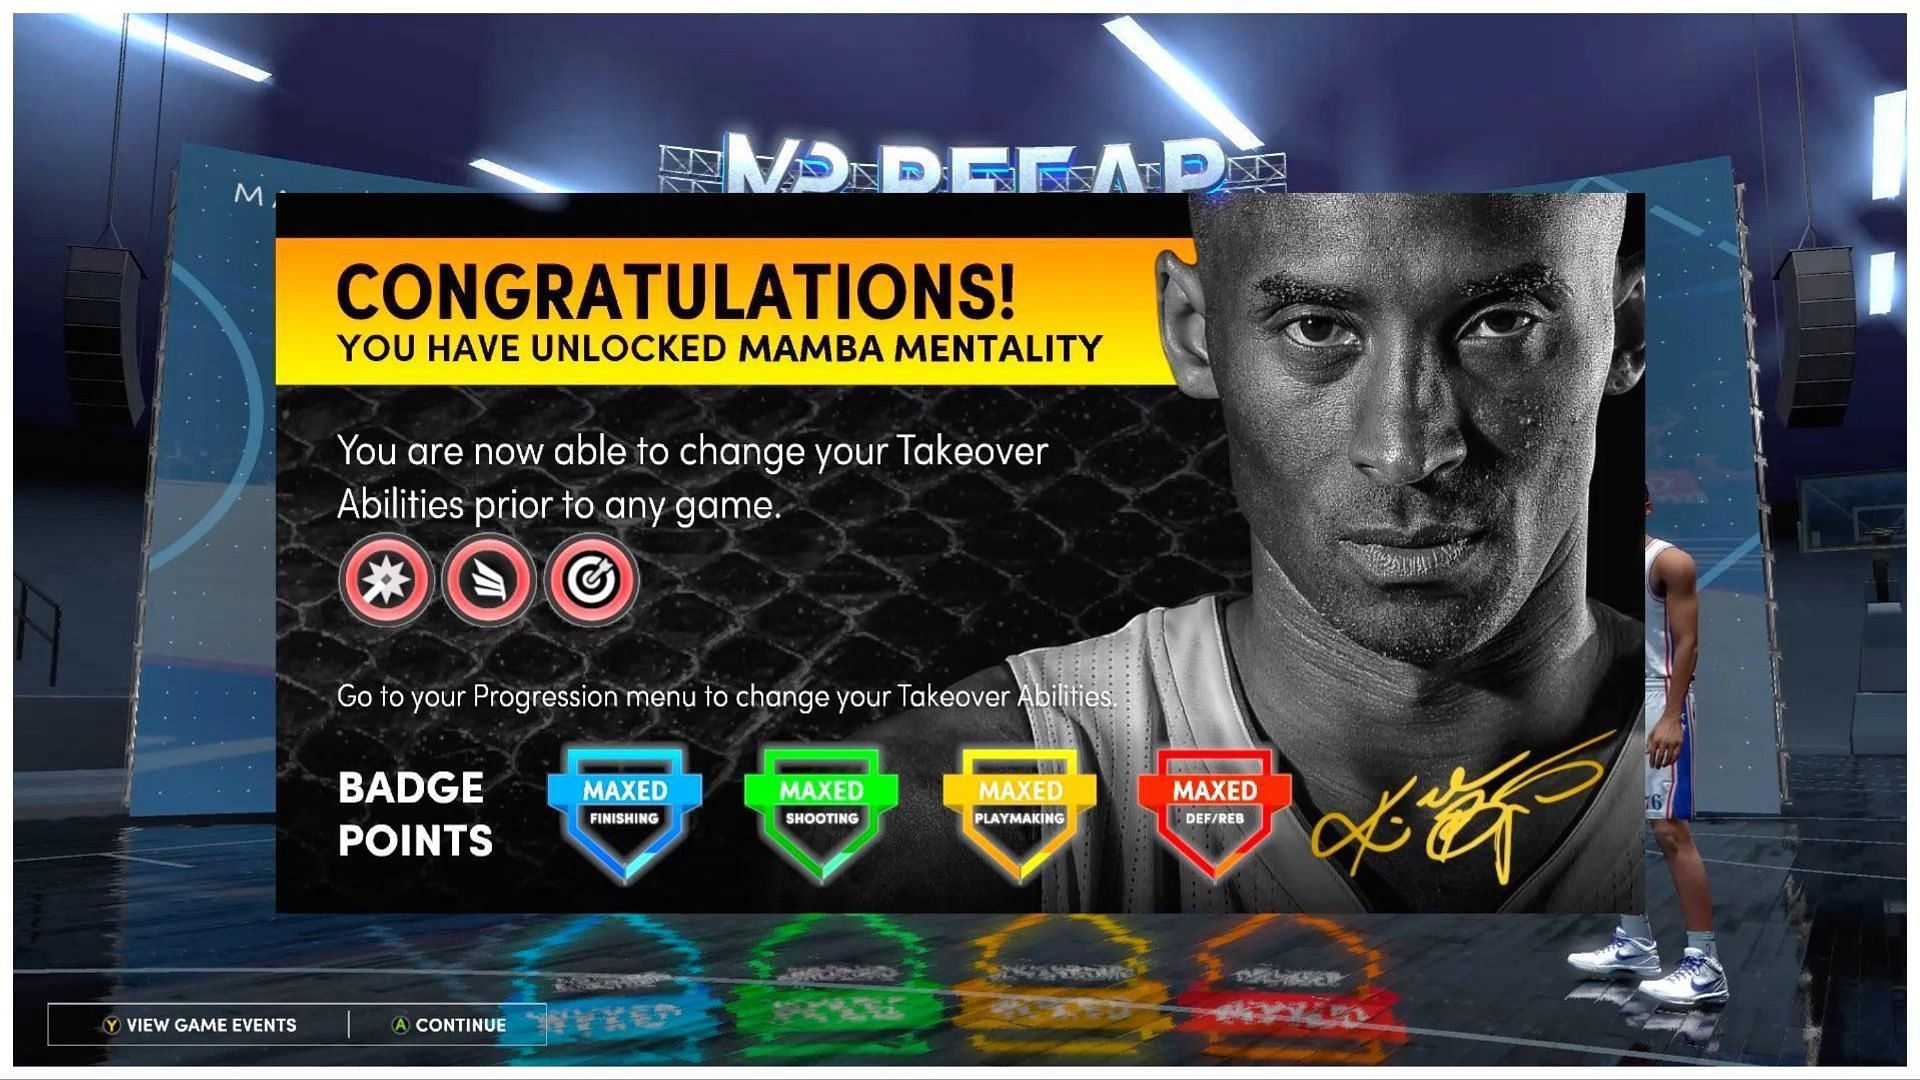 Mamba Mentality is available on both versions of NBA 2K23 (Image via 2K)